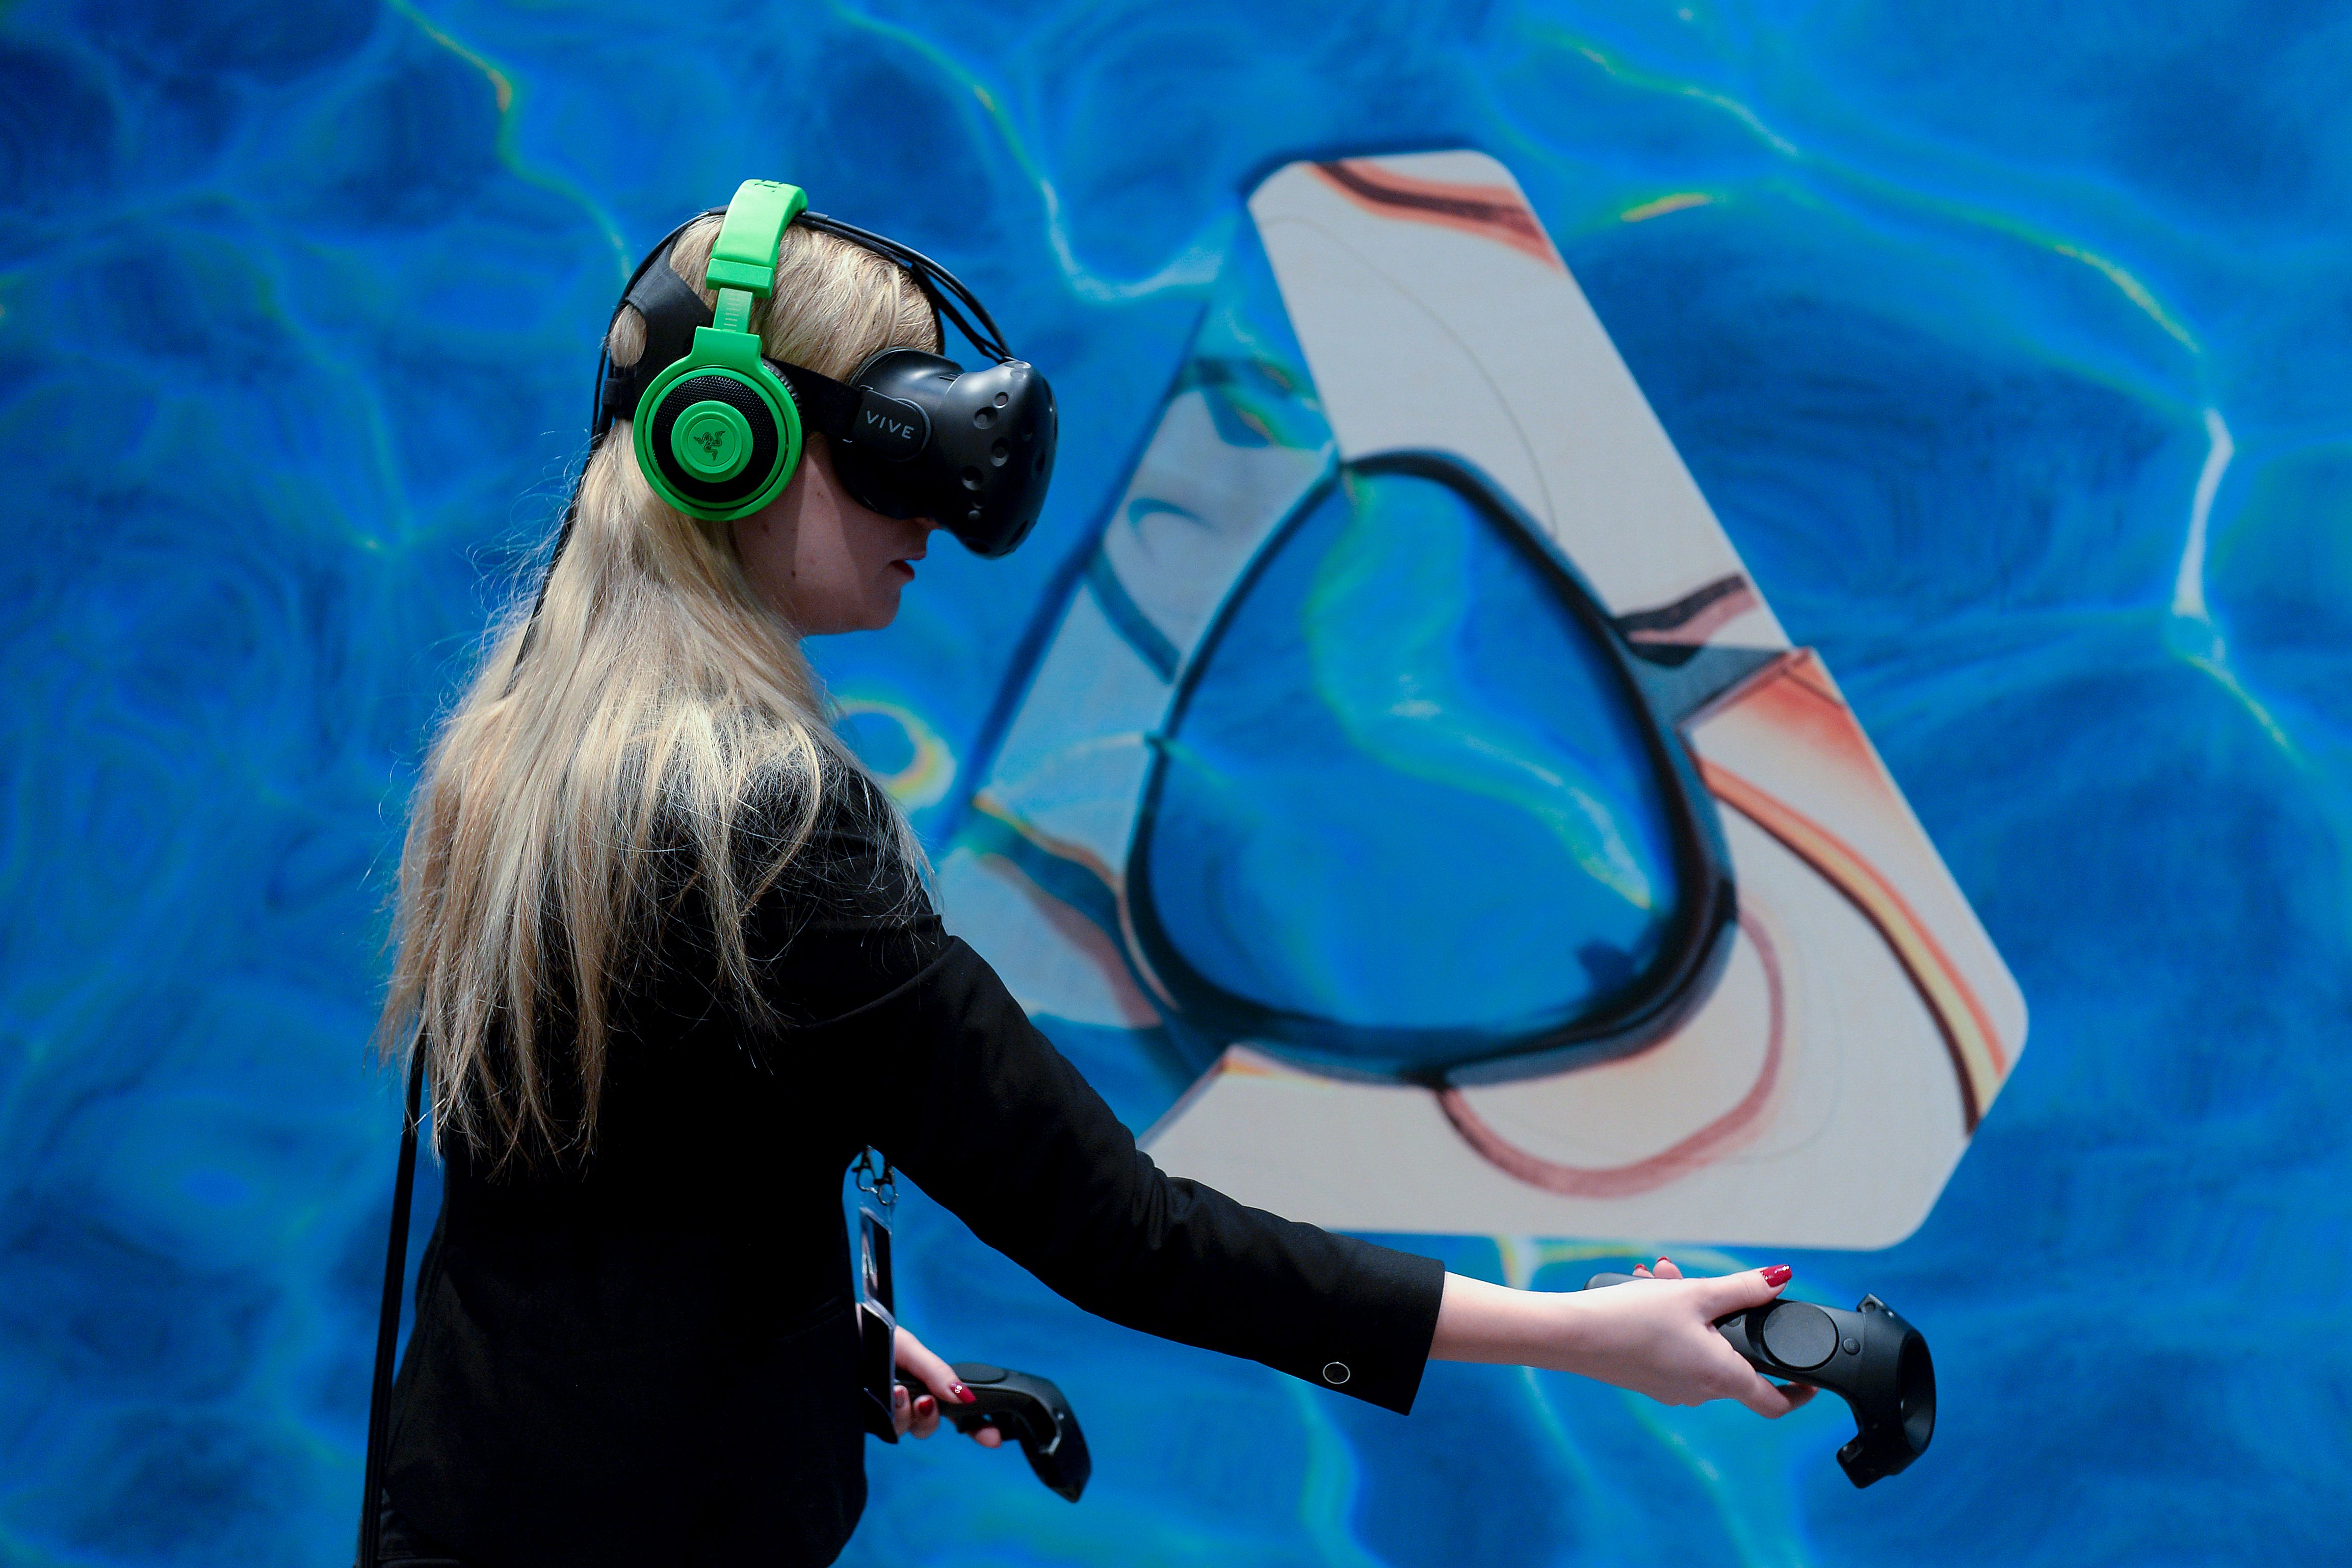 A visitor tests the new 'Vive steam VR' virtual device at the HTC stand on the second day of the Mobile World Congress in Barcelona on February 23, 2016. (Josep Lago&mdash;AFP/Getty Images)